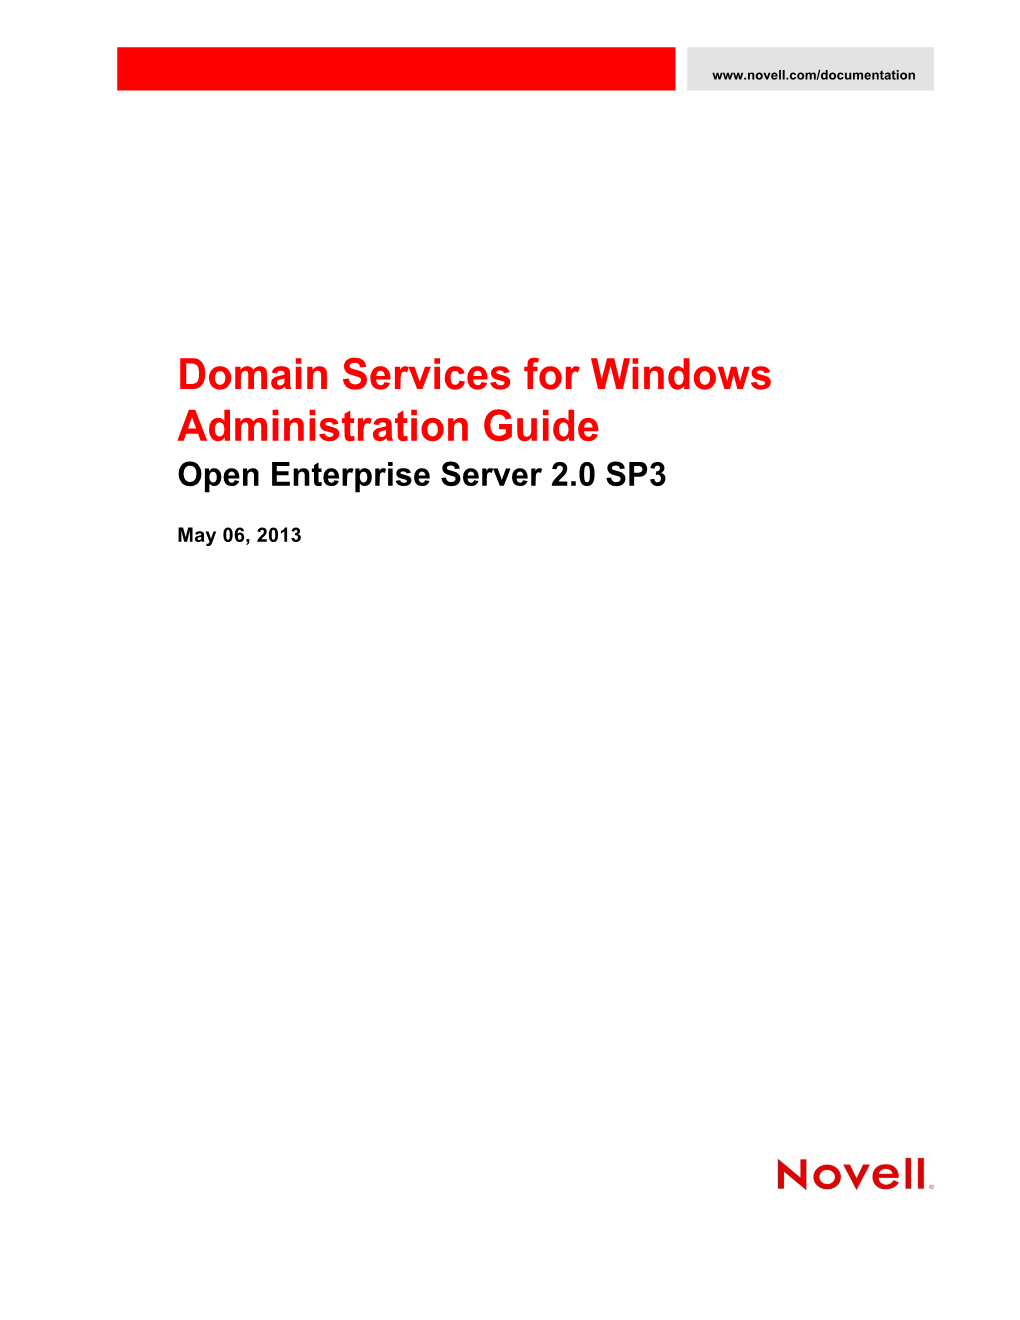 OES 2 SP3: Domain Services for Windows Administration Guide 8 Activities After Dsfw Installation Or Provisioning 145 8.1 Verifying the Installation